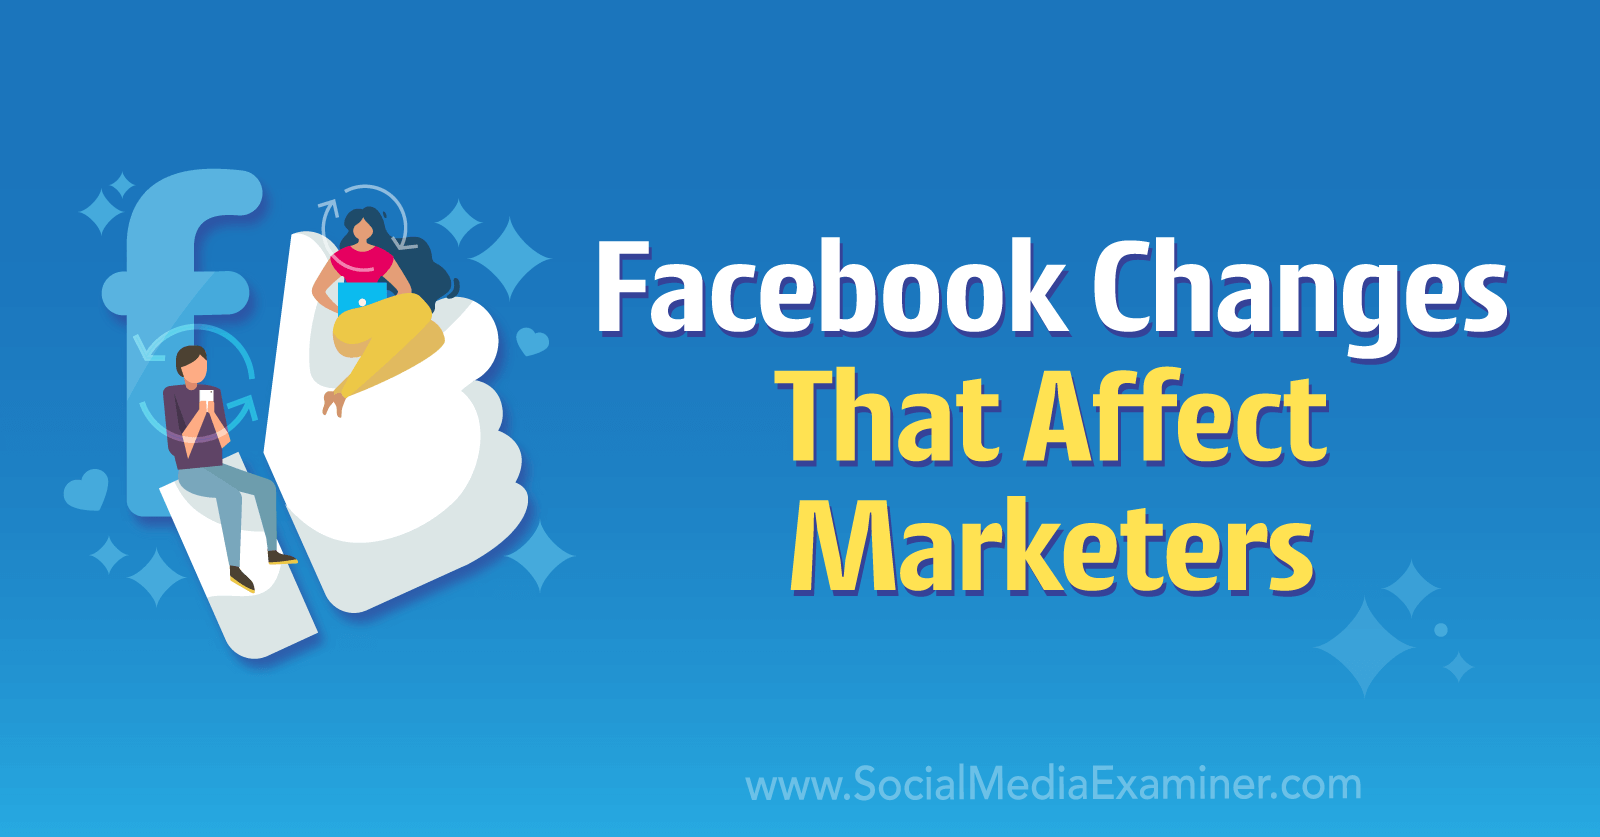 Facebook Updates: Changes That Affect Marketers by Social Media Examiner